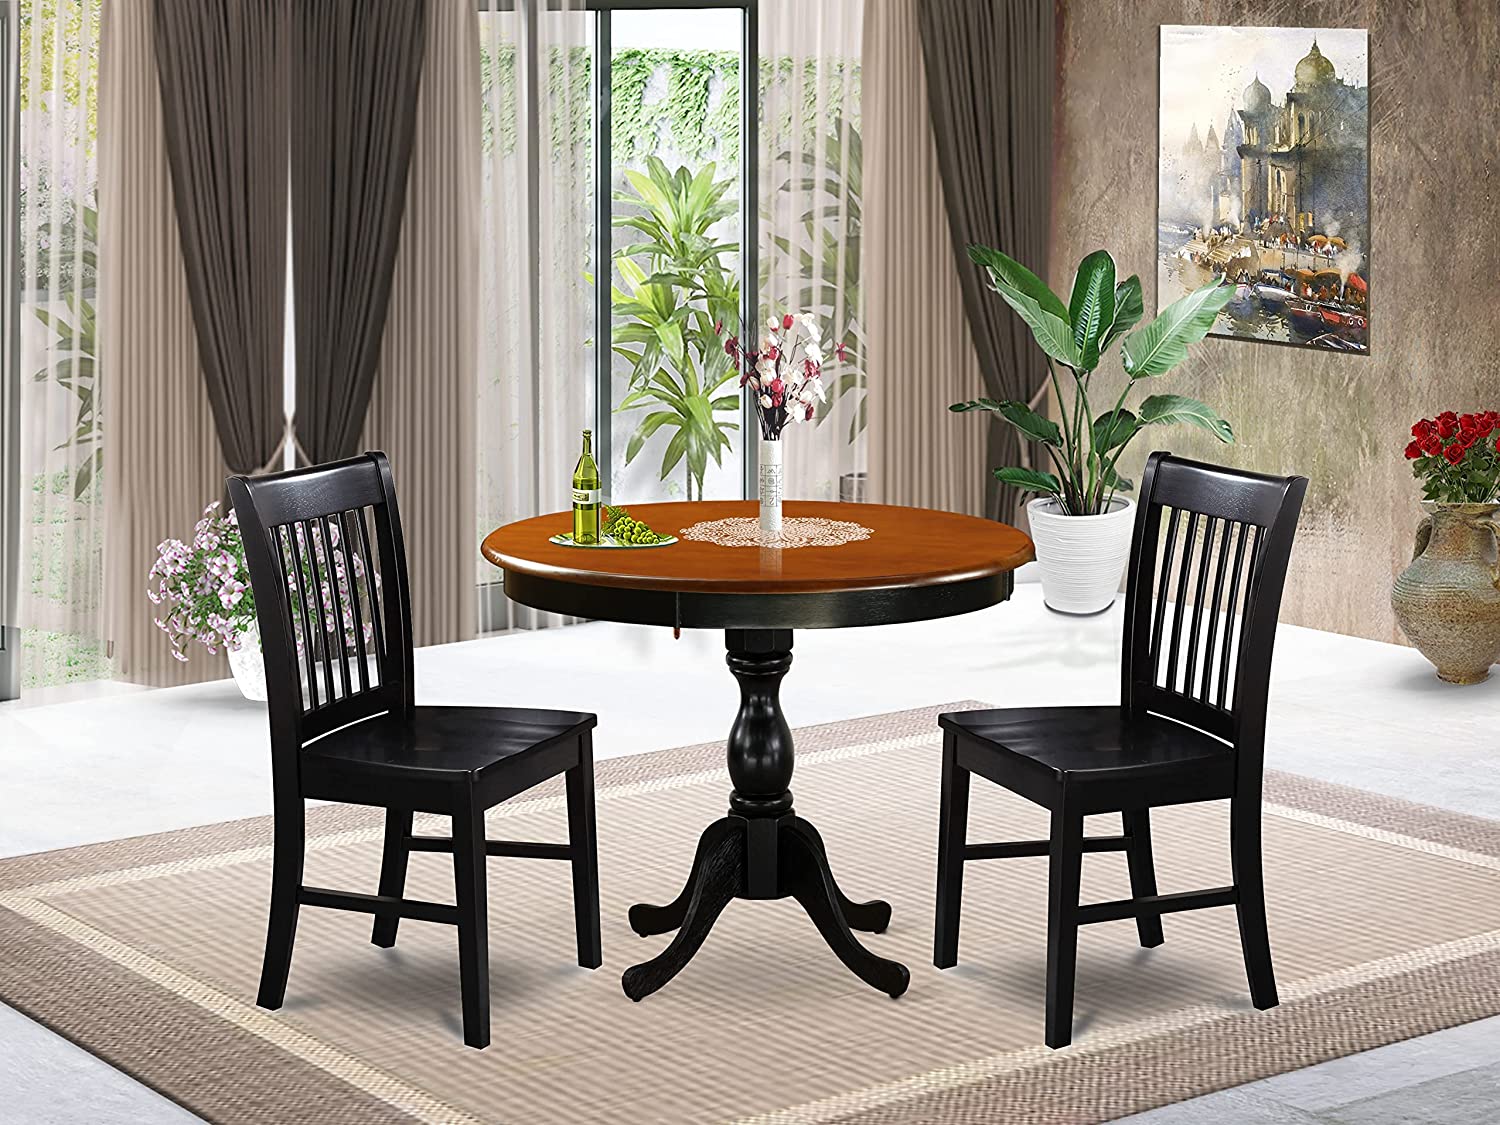 3 P Round 36" Dinette Kitchen Pedestal Dining Table and 2 Dining Chairs Black & Cherry